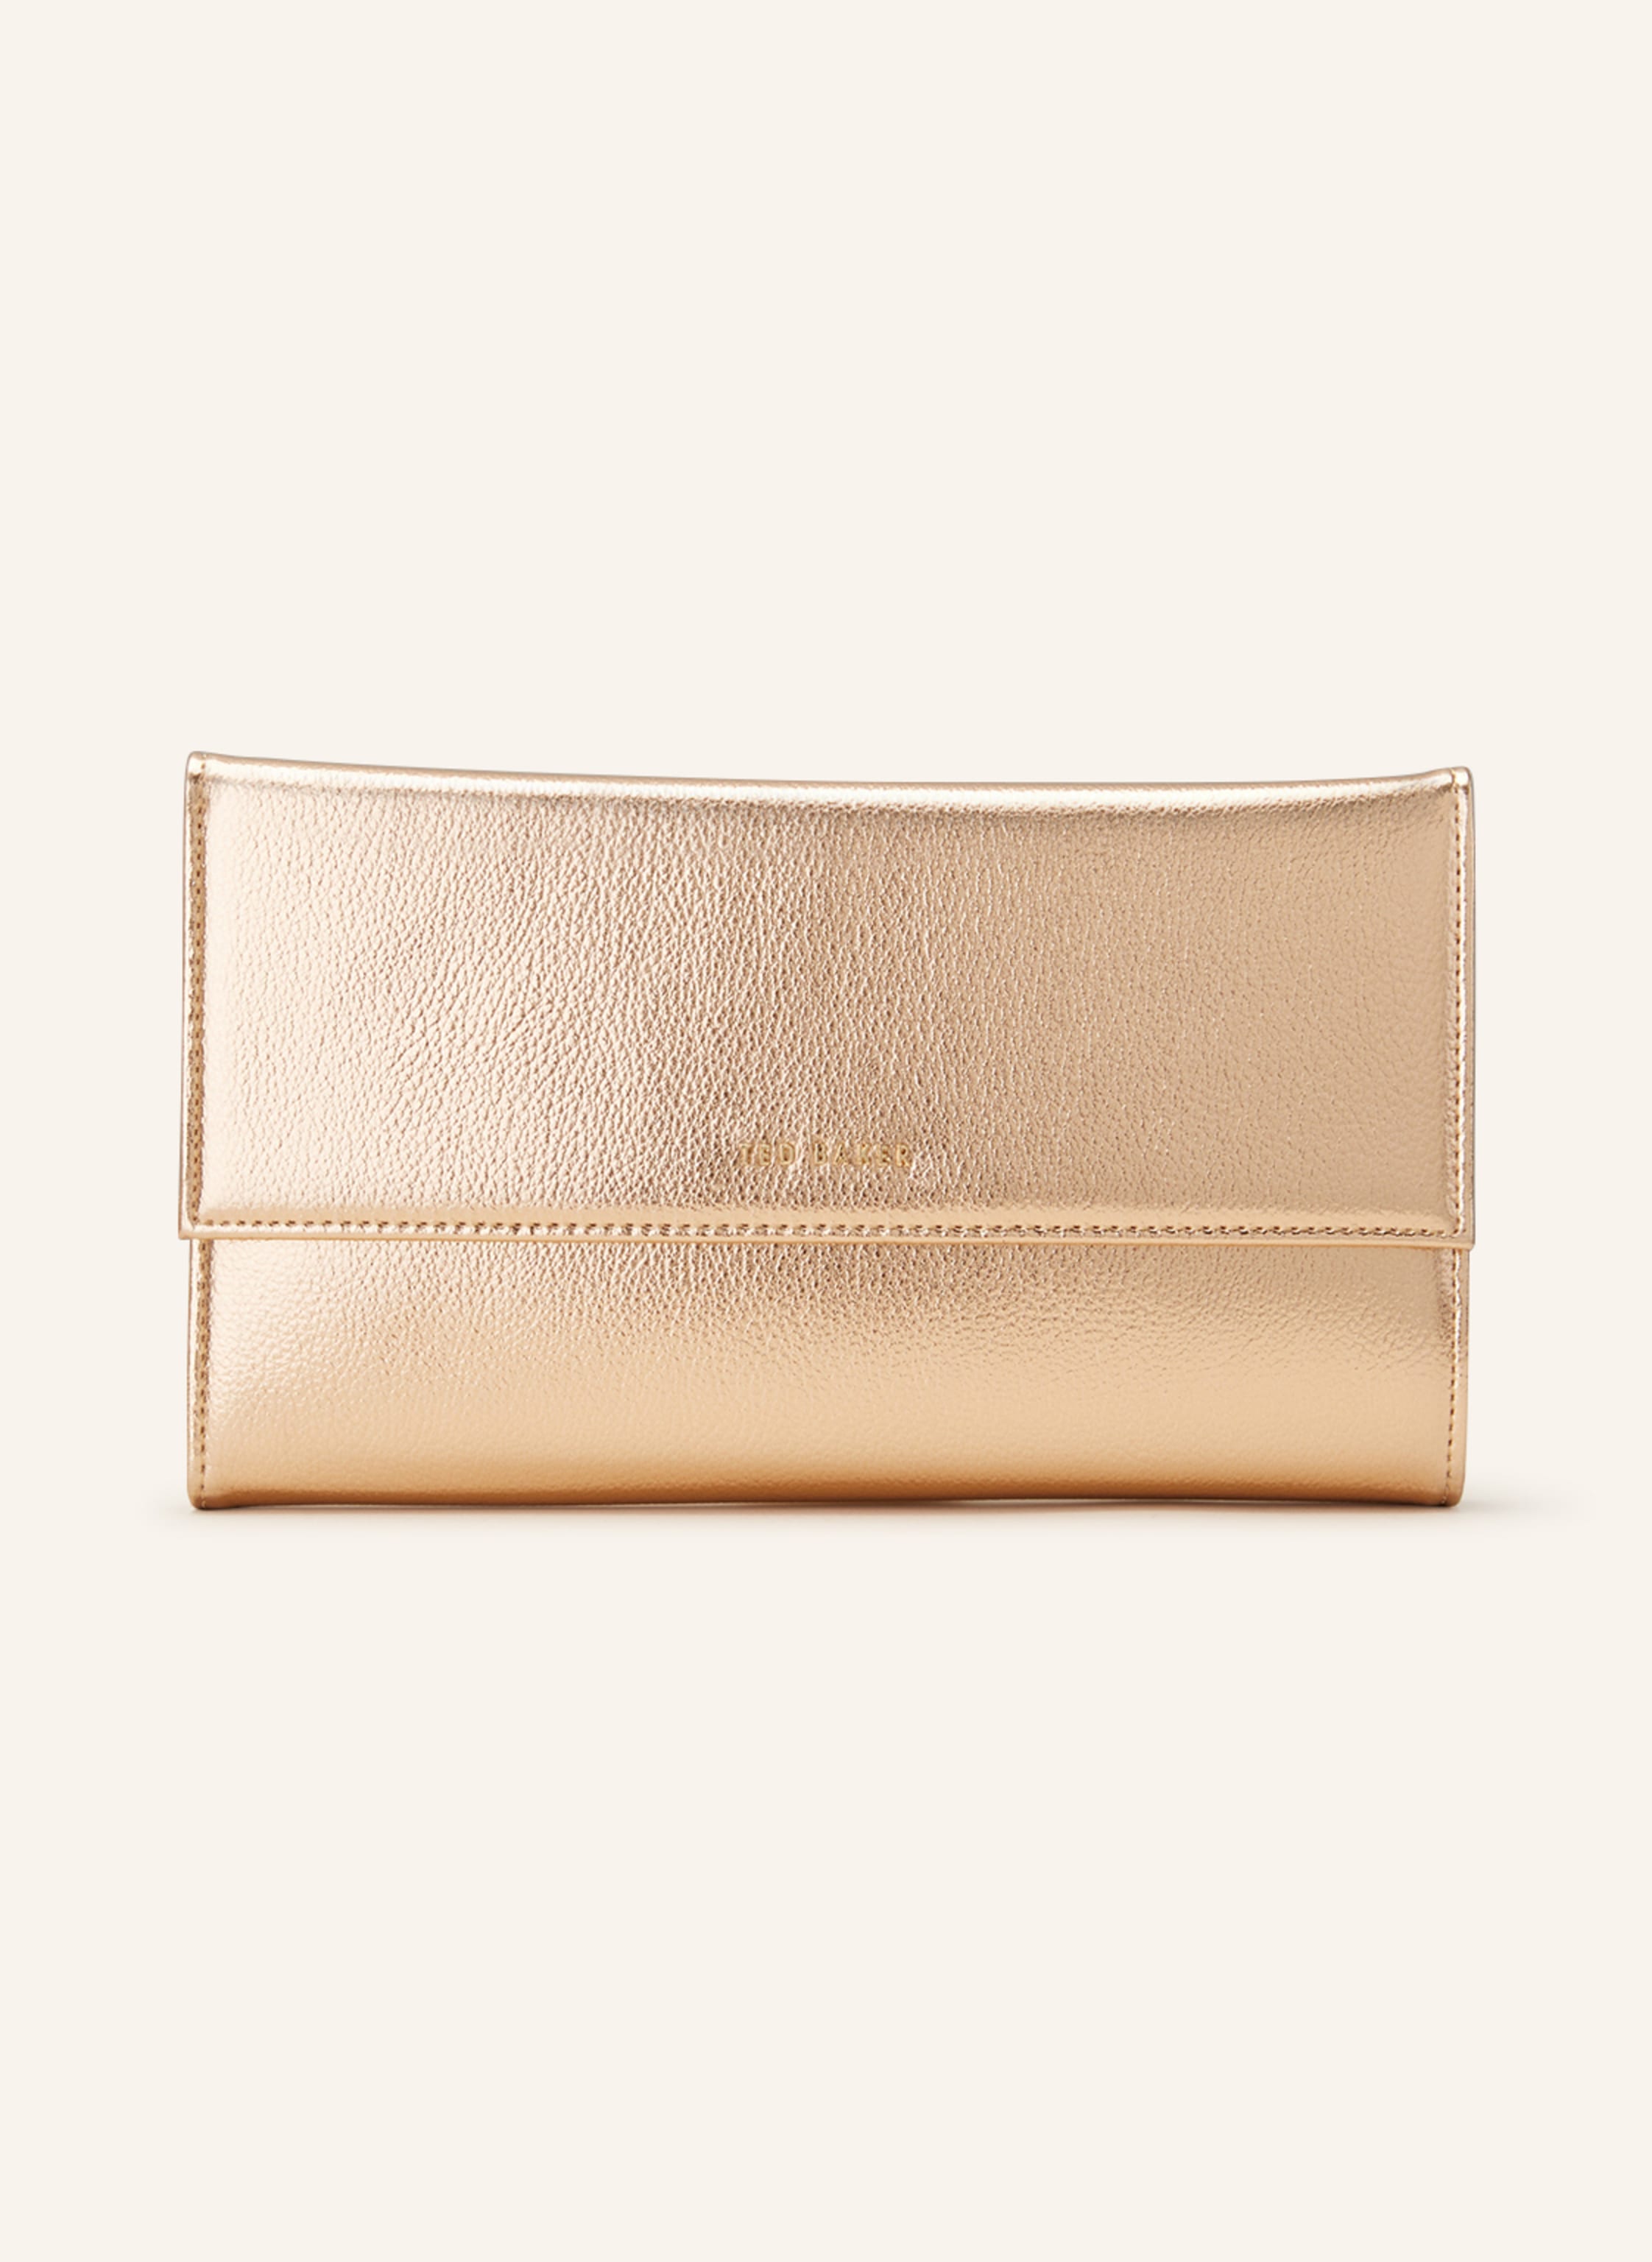 TED BAKER Clutch RAYYA in rose gold